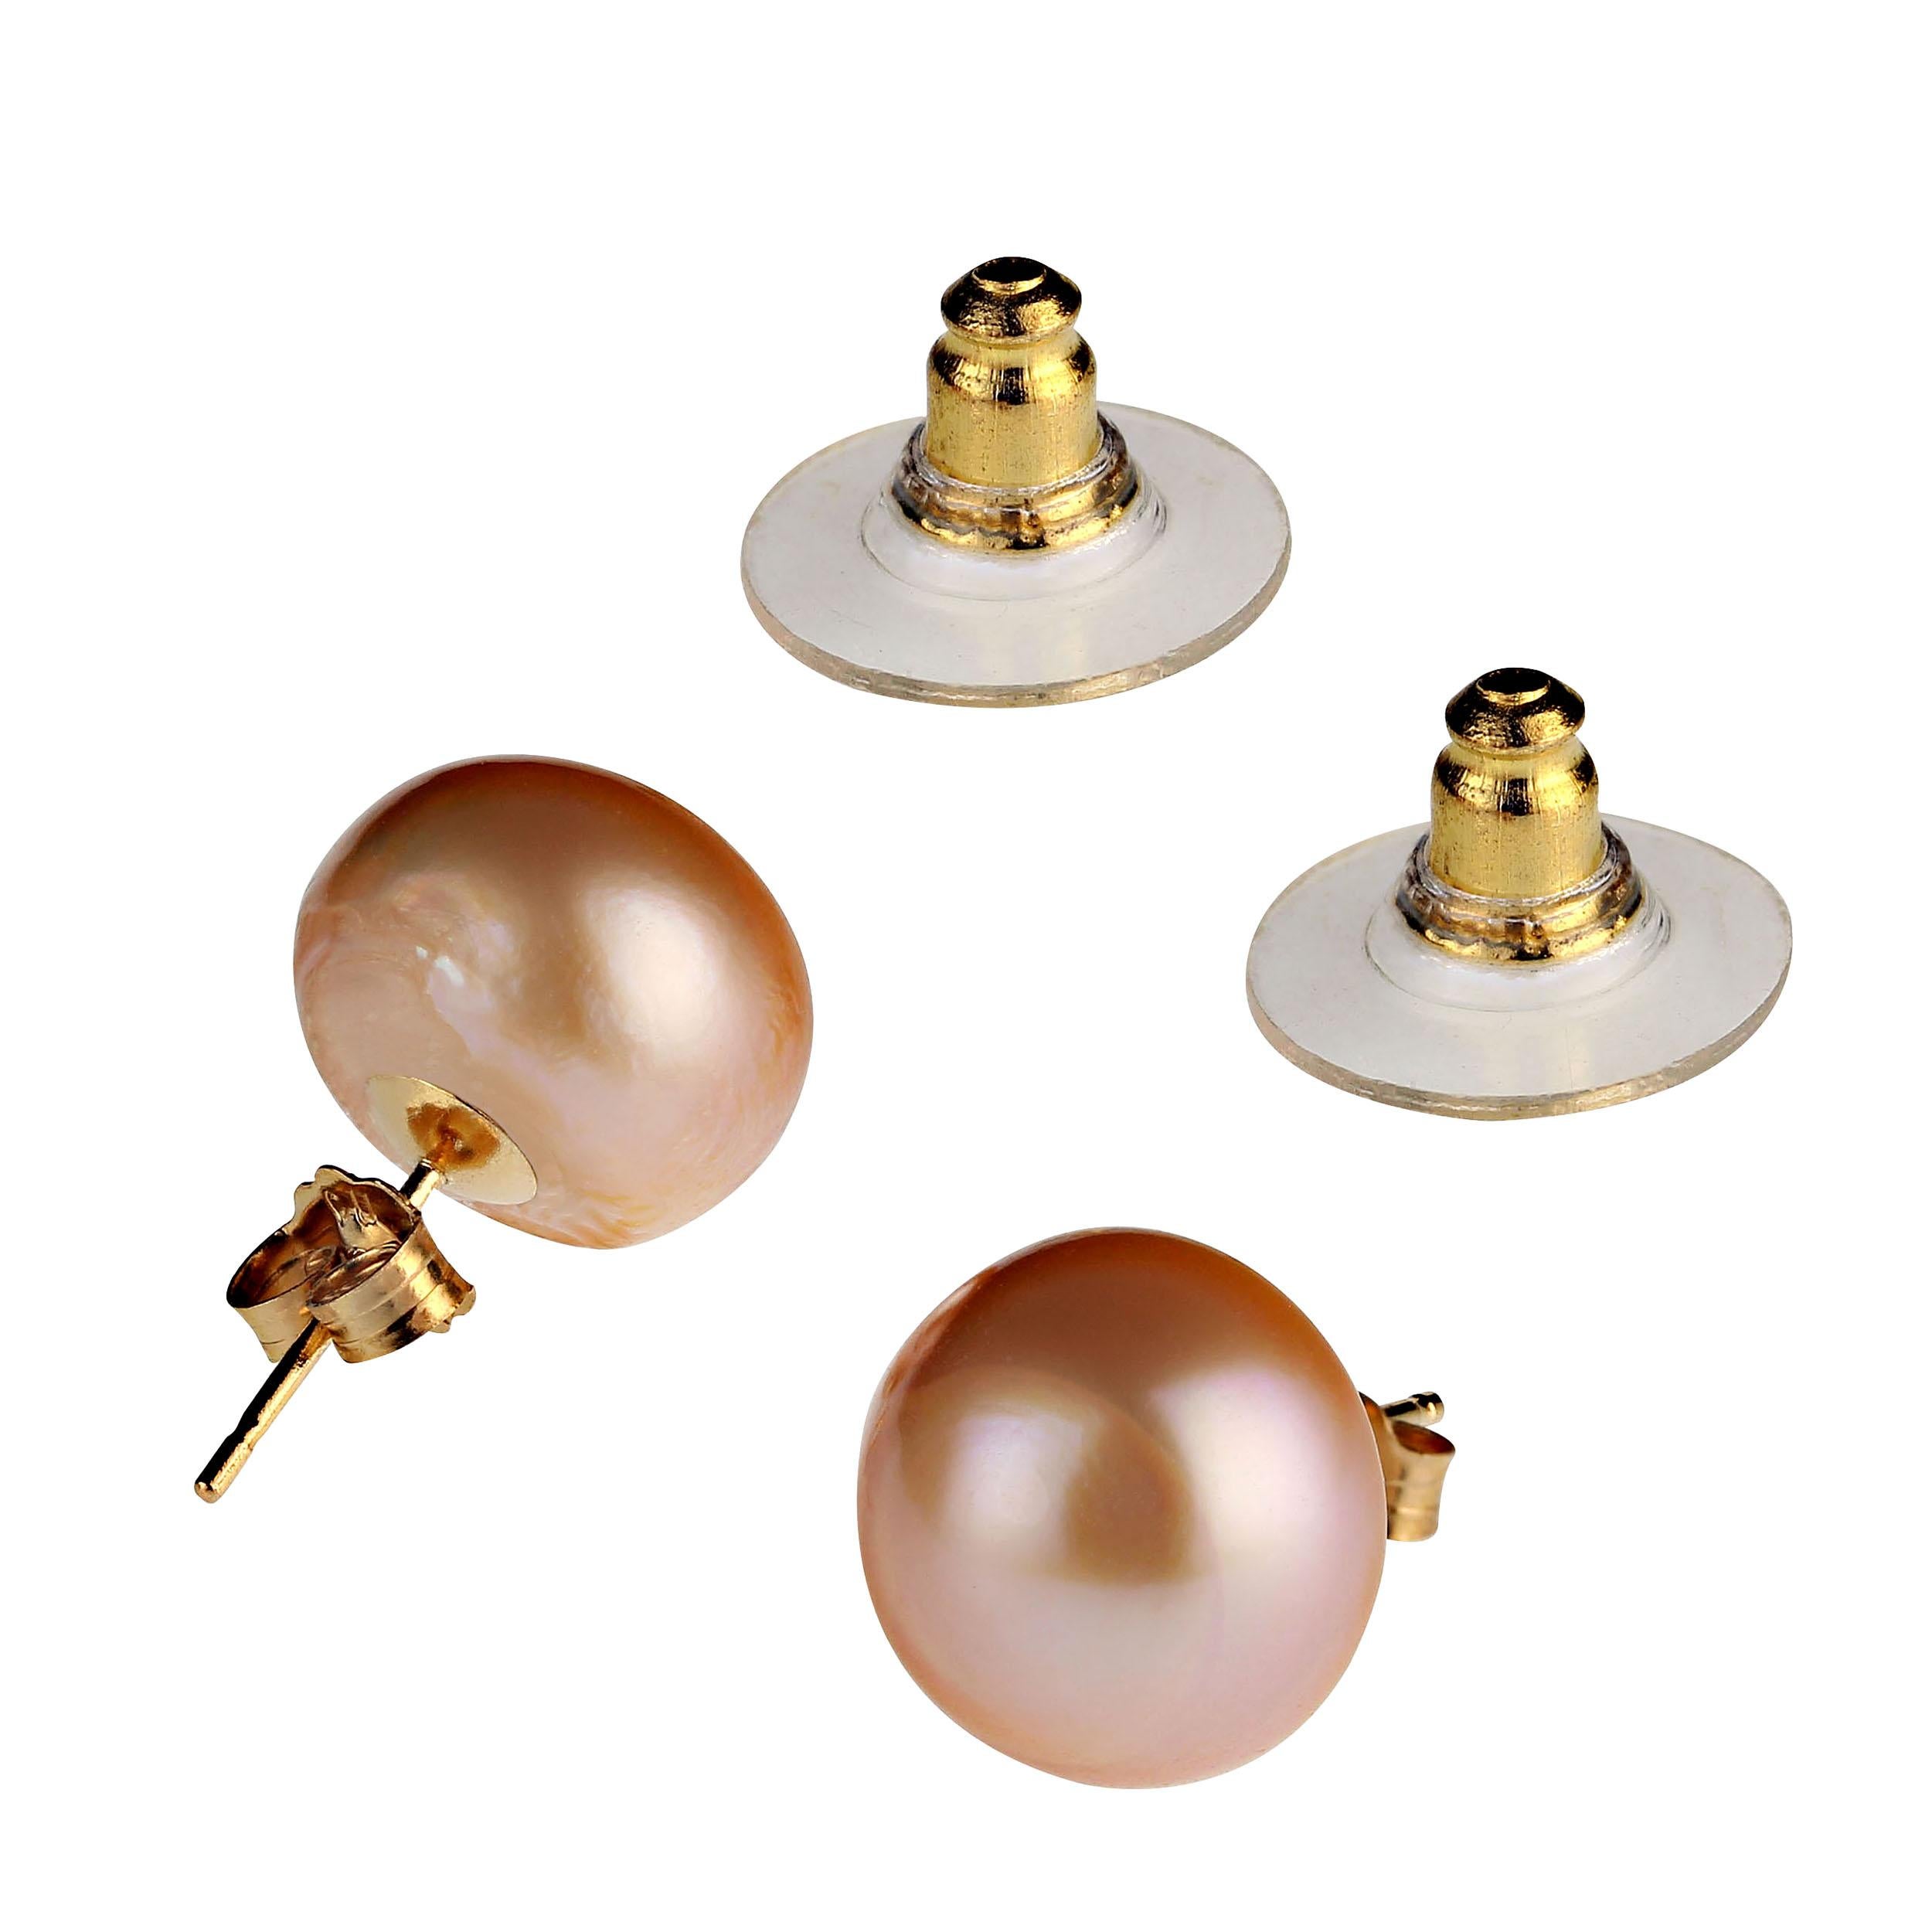 Your classic jewelry must have, lustrous, glowing 10MM Pearl Studs. These gorgeous studs are iridescent bronzy with 14k yellow gold posts, push backs, and cushion backs.  The cushion backs ensure comfort and keep the pearl secured properly on your